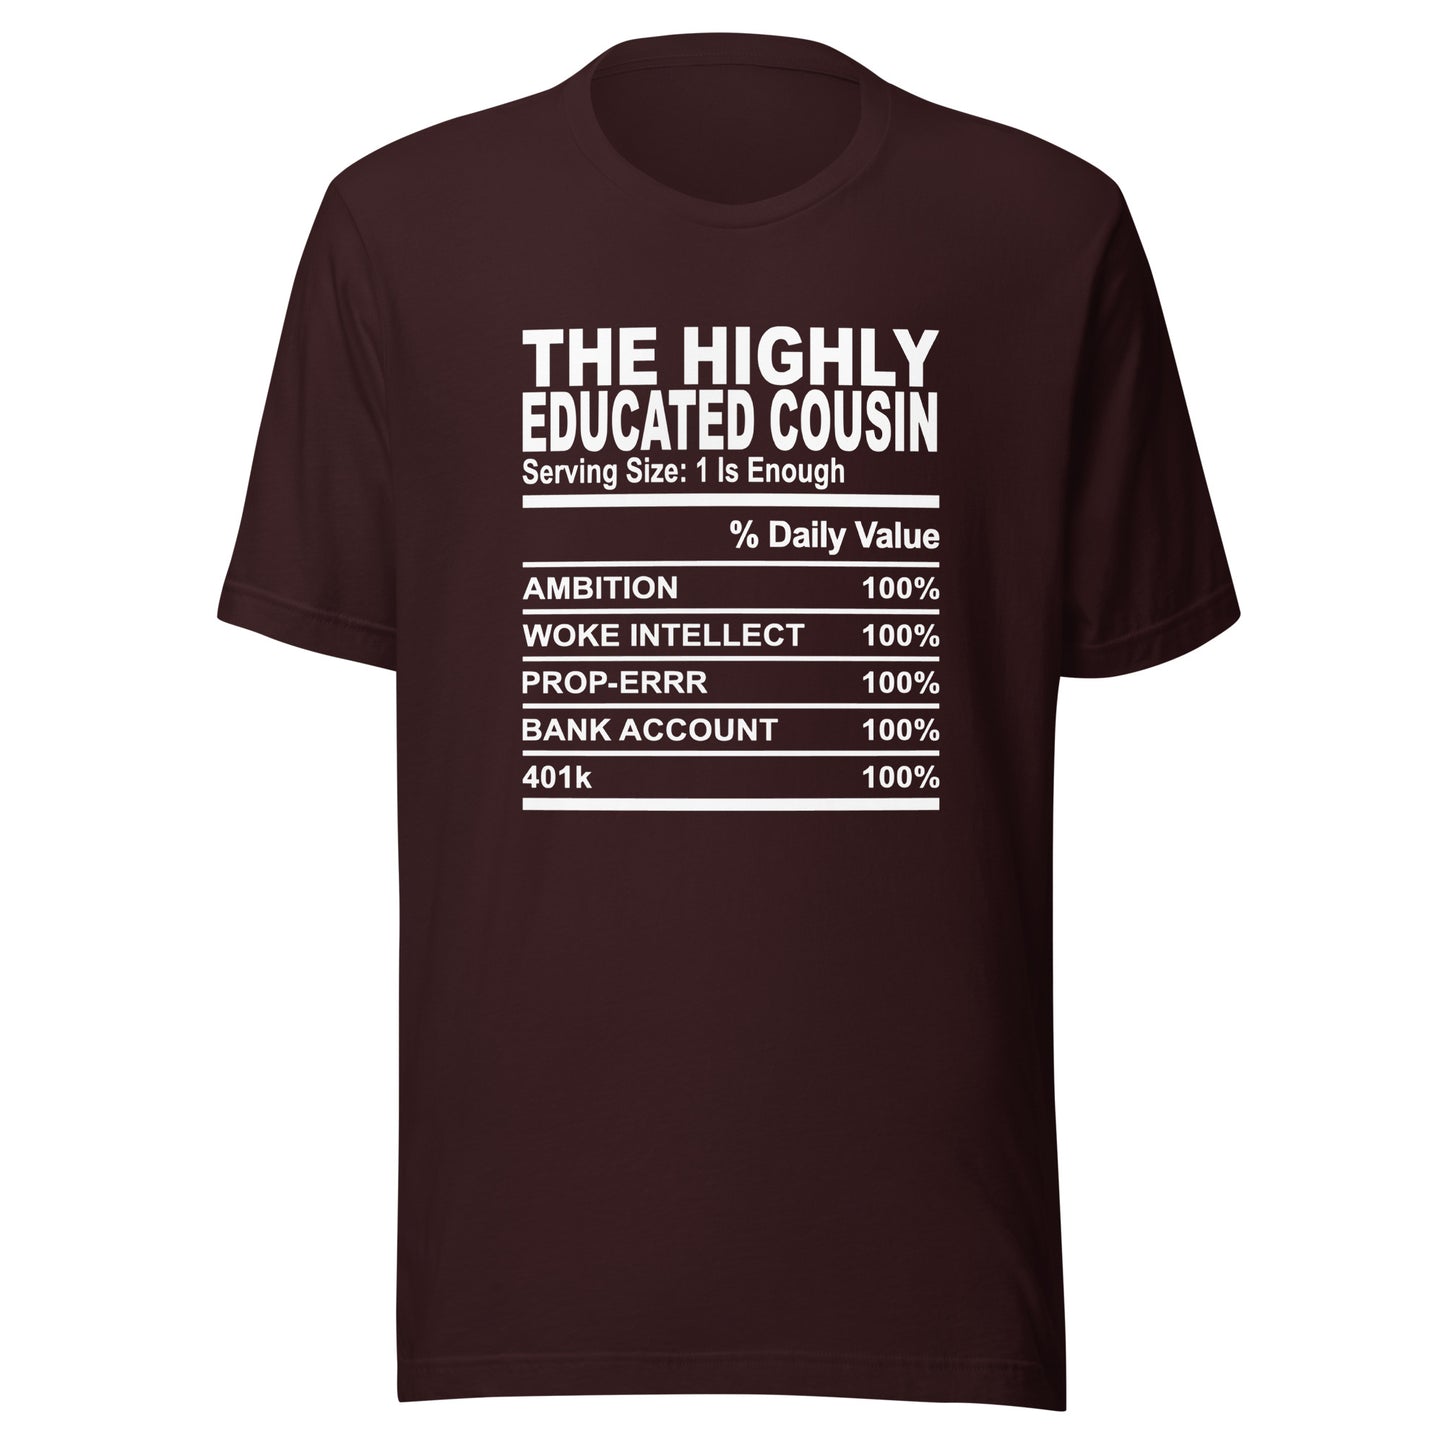 THE HIGHLY EDUCATED COUSIN - 2XL-3XL - Unisex T-Shirt (white print)